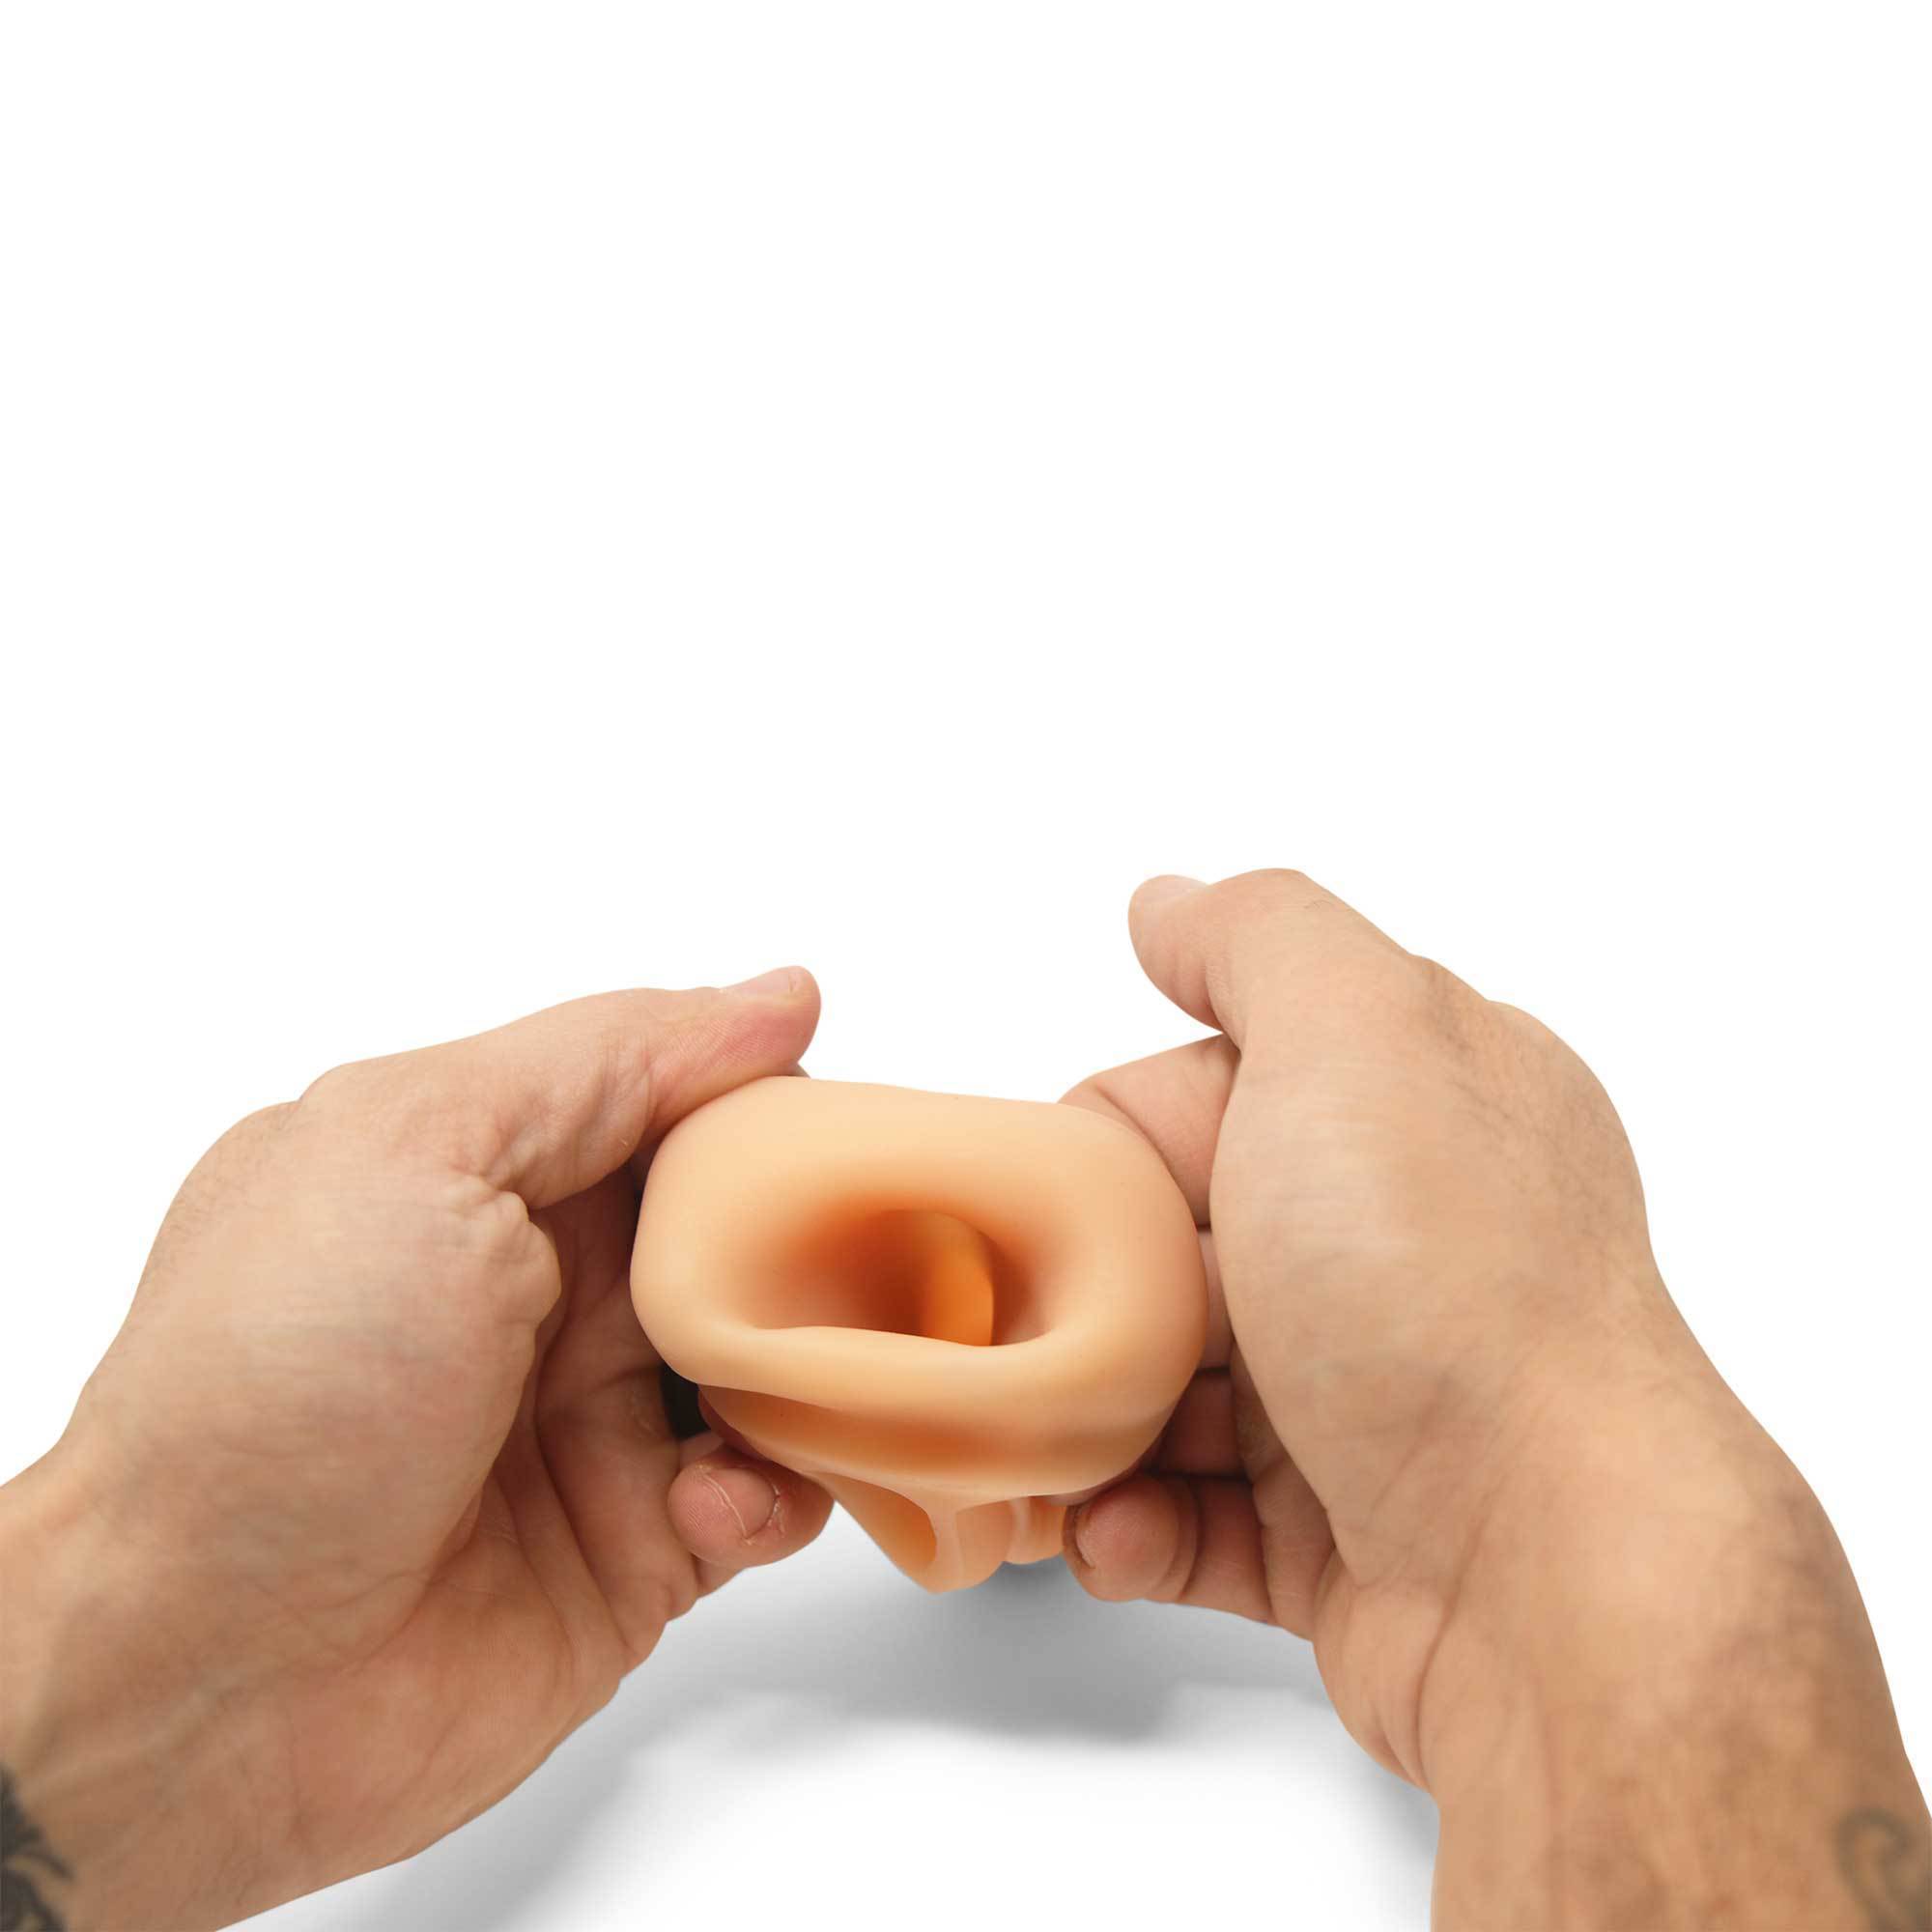 Natural 6 Inch Penis Extension Sleeve for Men by Healthy Vibes pic